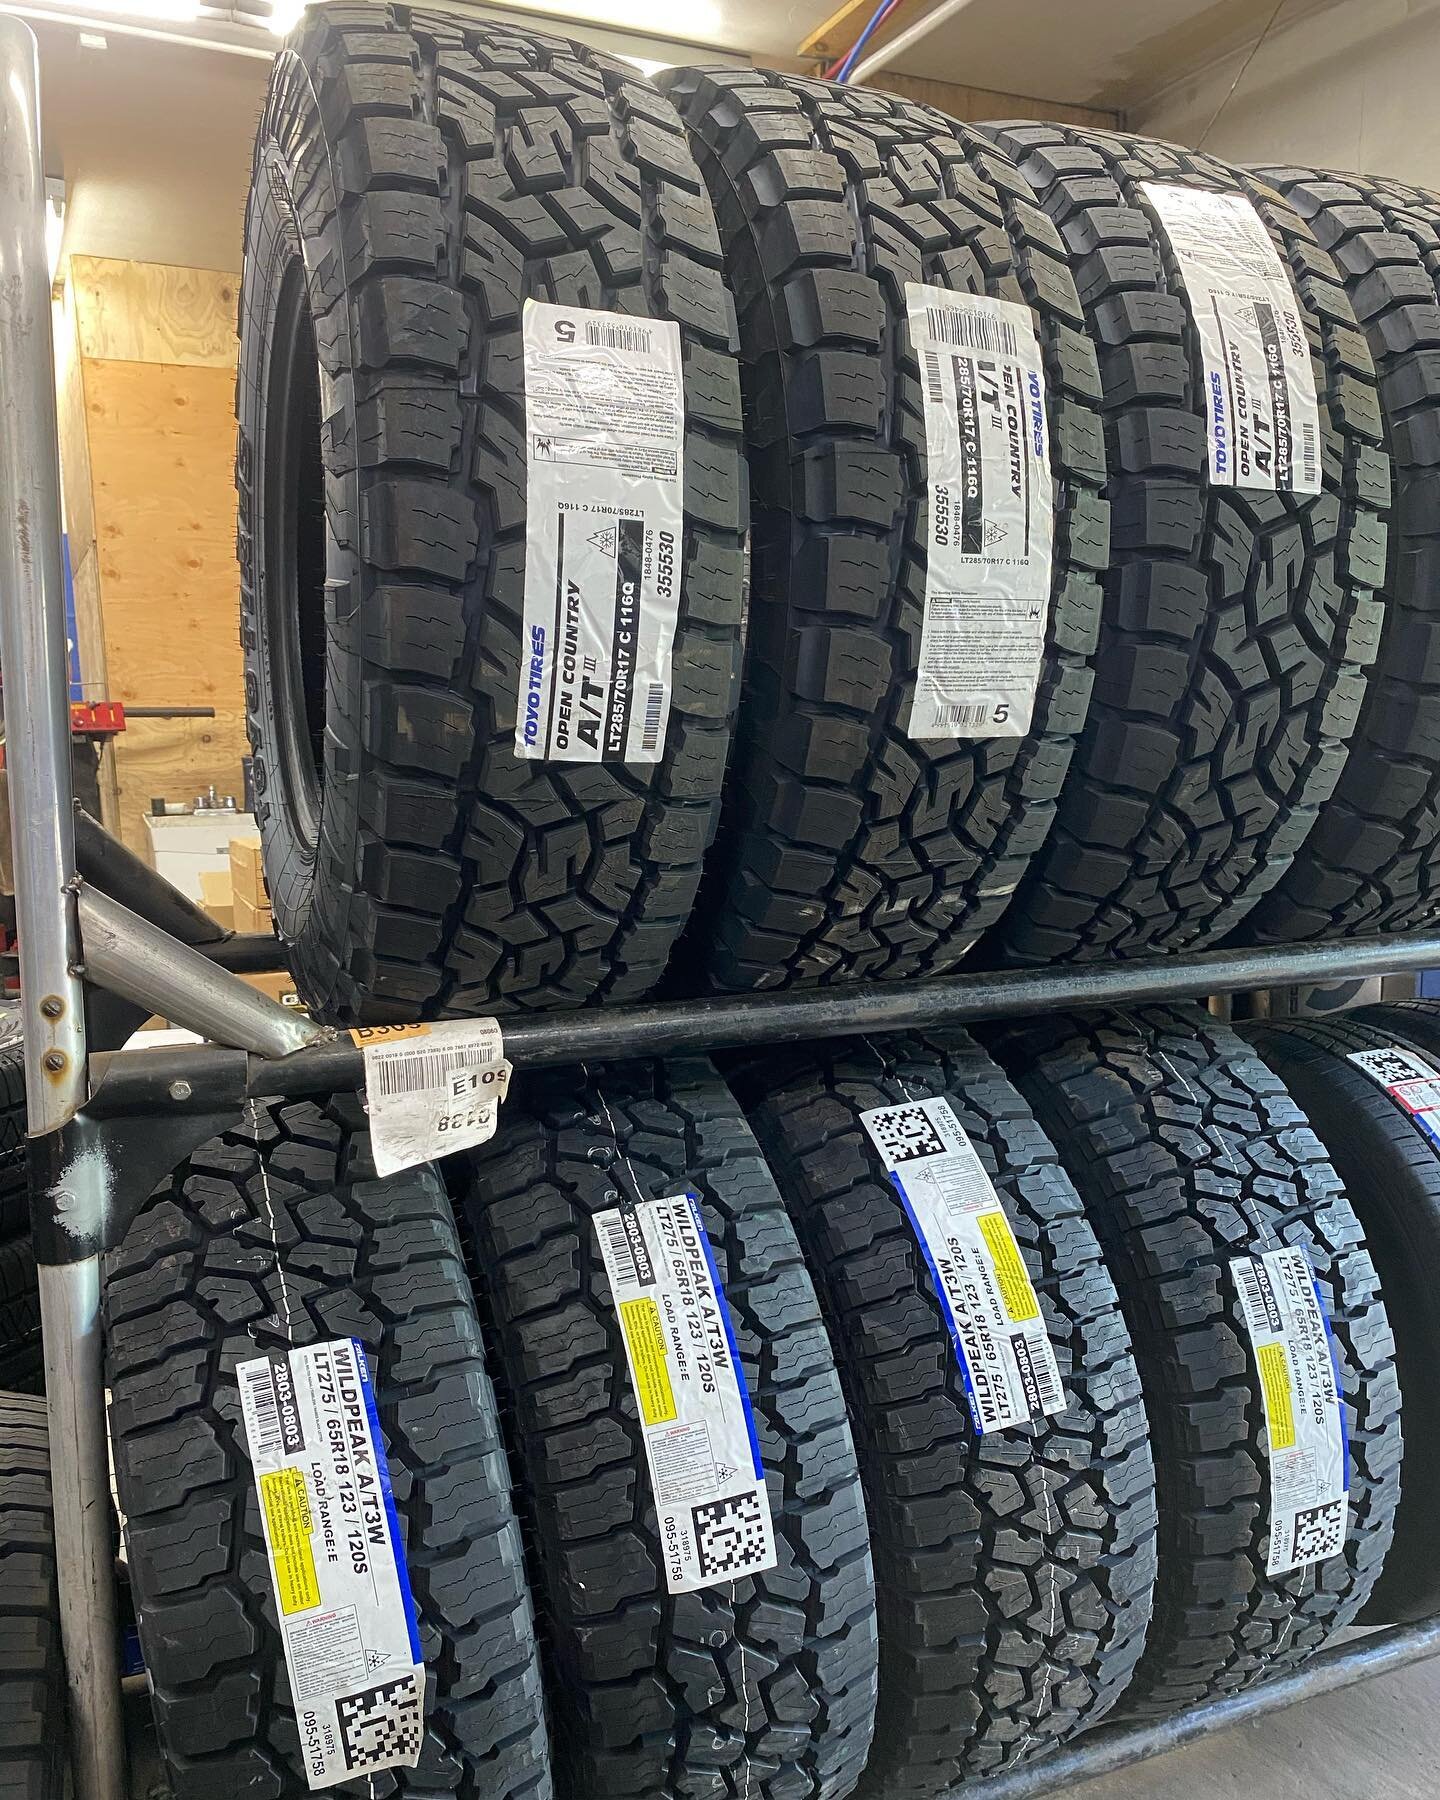 Our favorite truck tires! 
Falken Wildpeak AT3W &amp; Toyo Open Country AT3&rsquo;s .
.
.
.
#falkentires #toyotires #wildpeak #opencountry #at3 #trucklife #appautocare #newtripoli